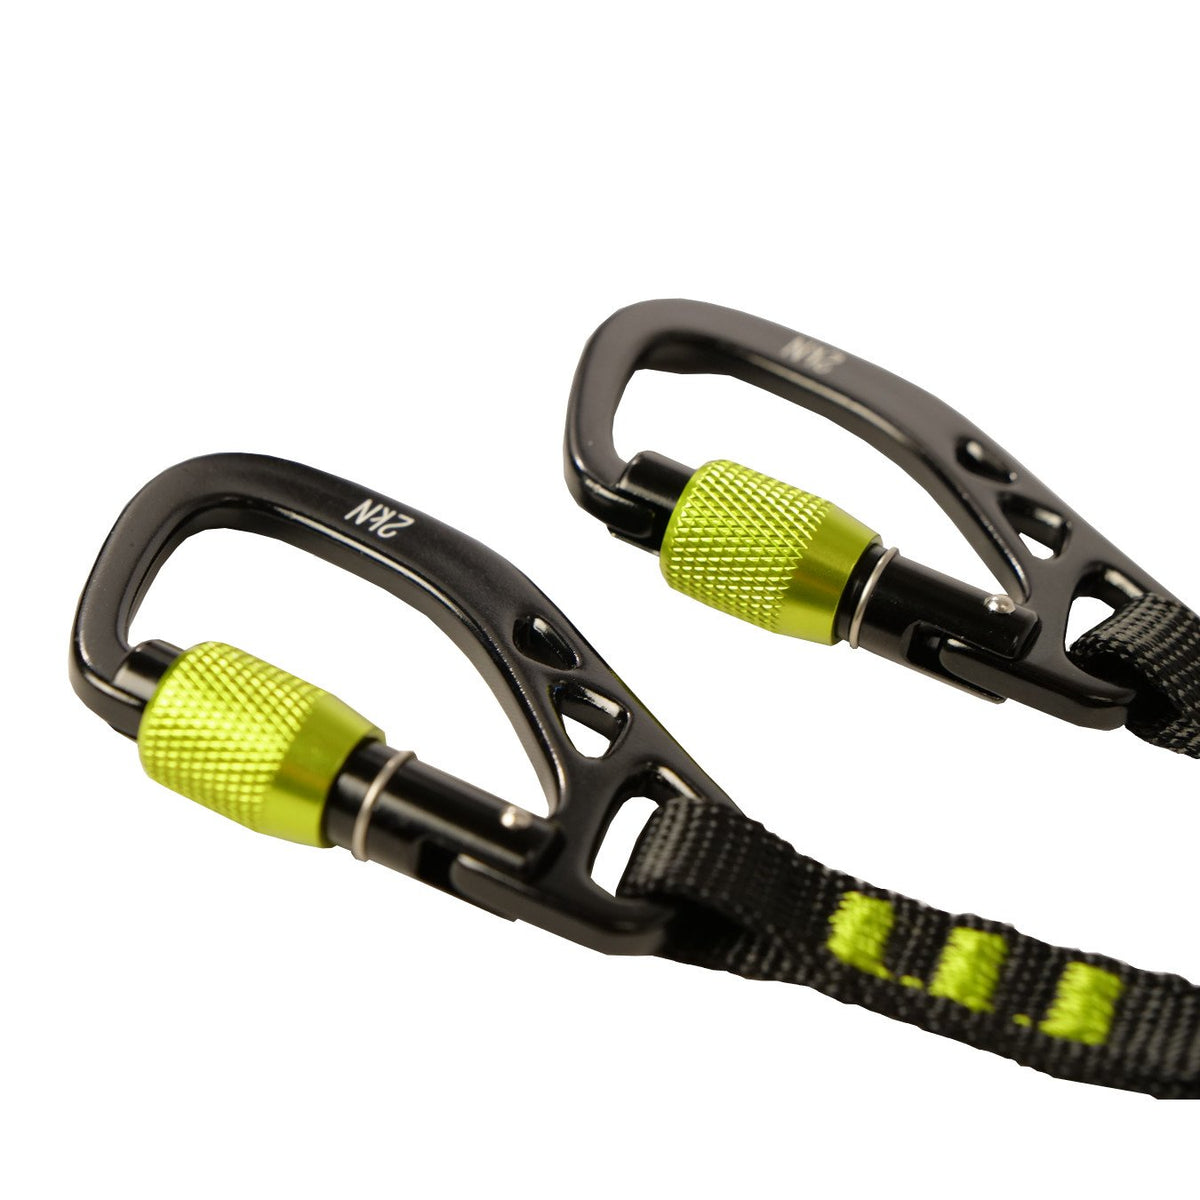 Close Up view of the Black Diamond Spinner Leash locking carabiners in Green and Black